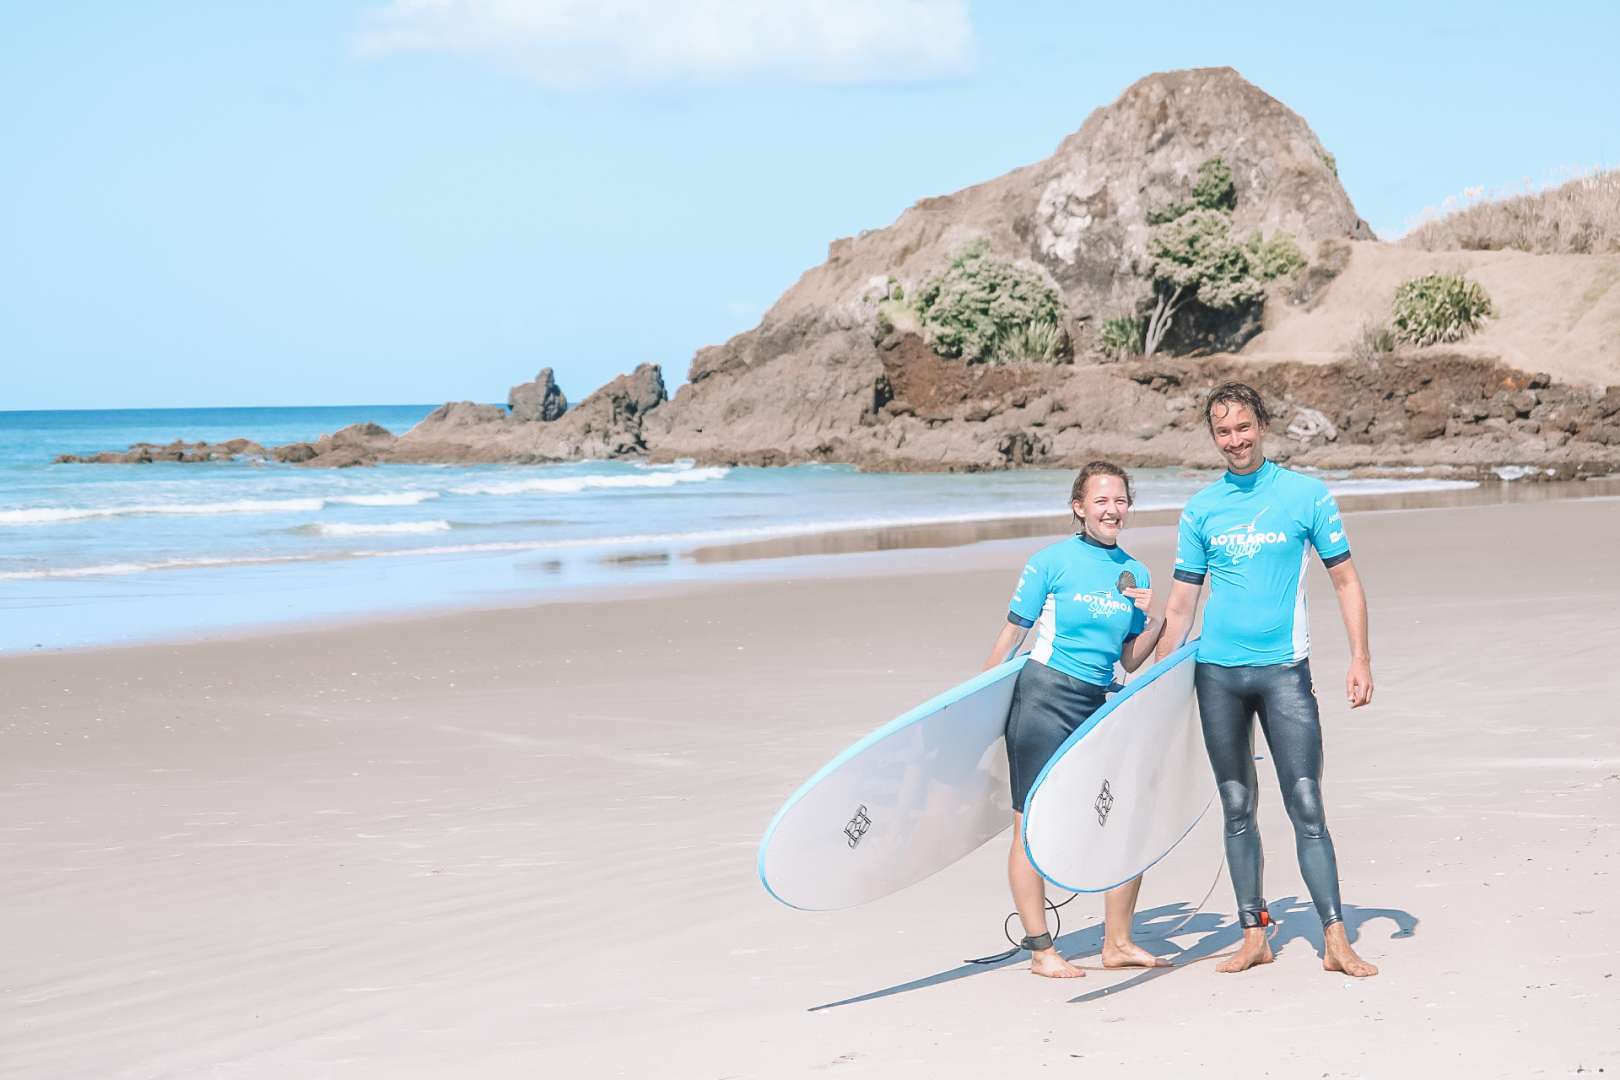 Surf Lessons Mangawhai for surfers of all skill levels